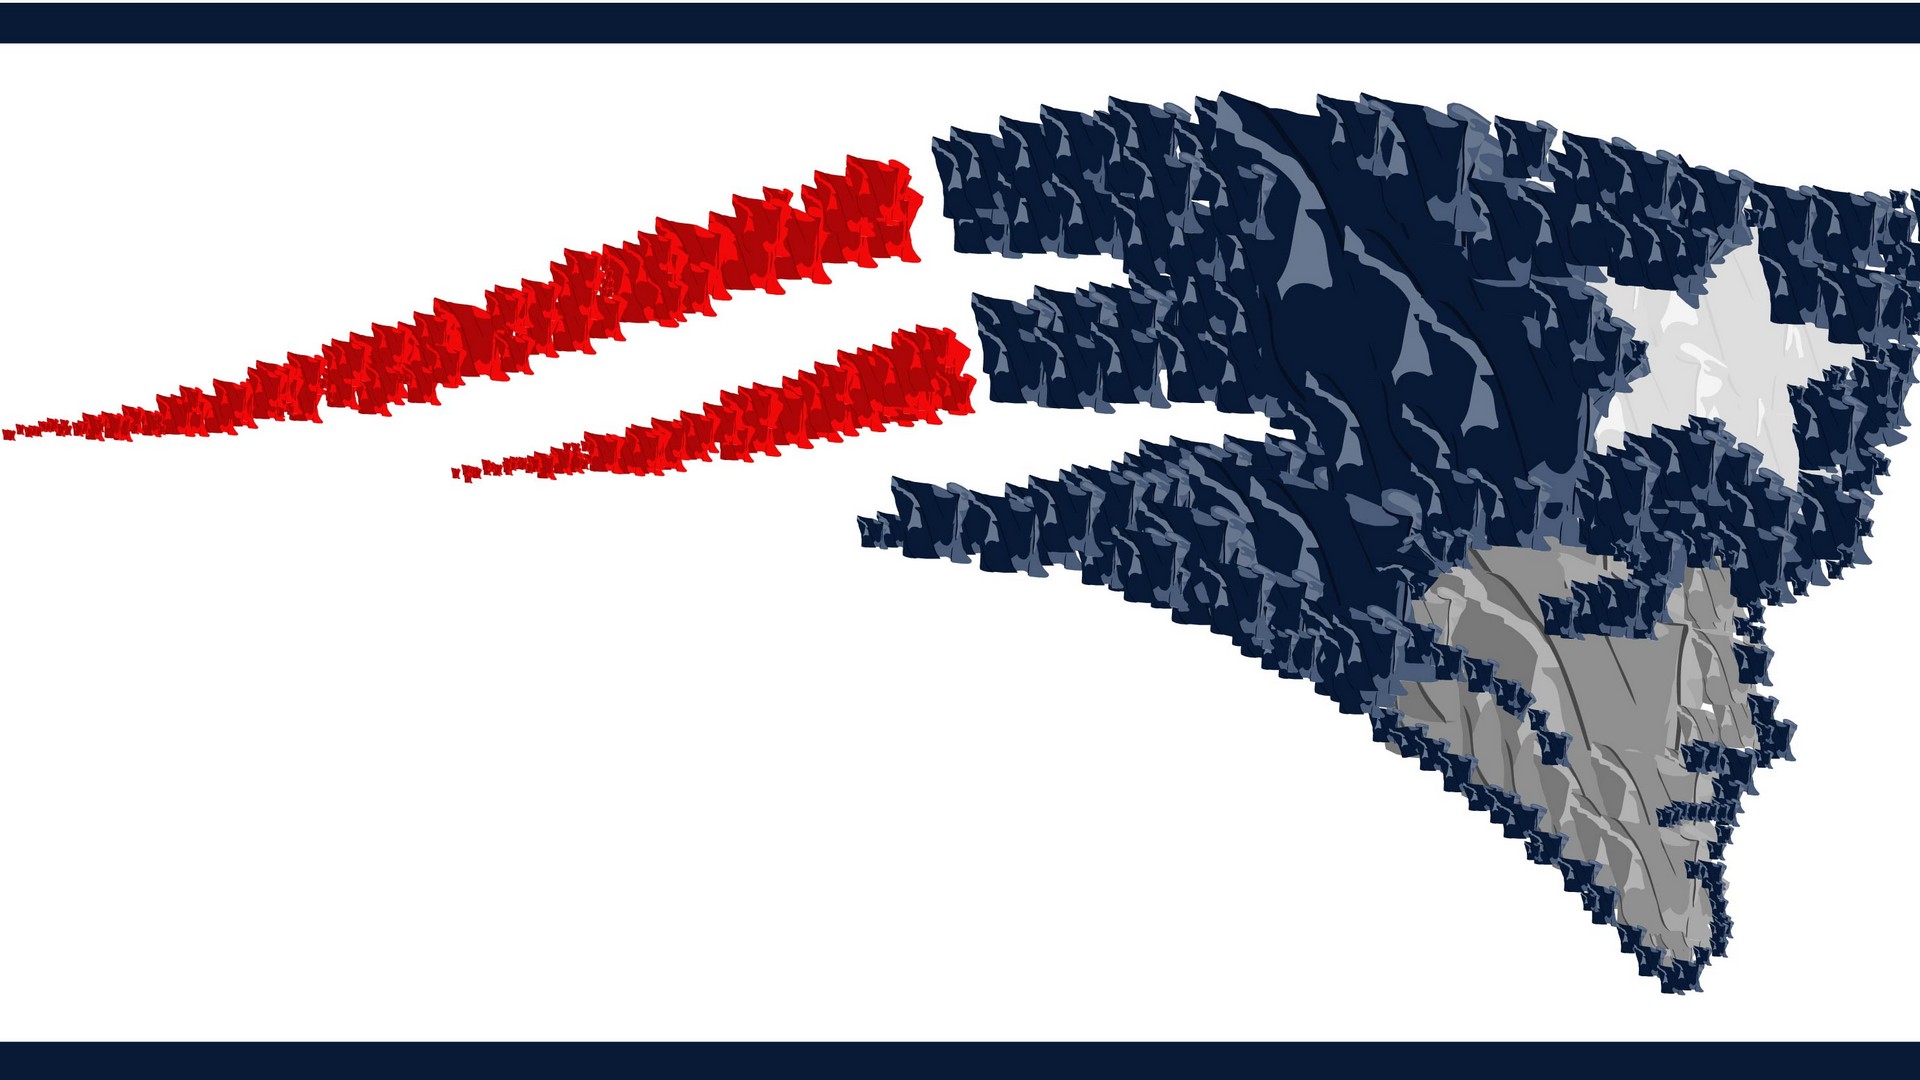 NE Patriots Wallpaper For Mac With Resolution 1920X1080 pixel. You can make this wallpaper for your Mac or Windows Desktop Background, iPhone, Android or Tablet and another Smartphone device for free